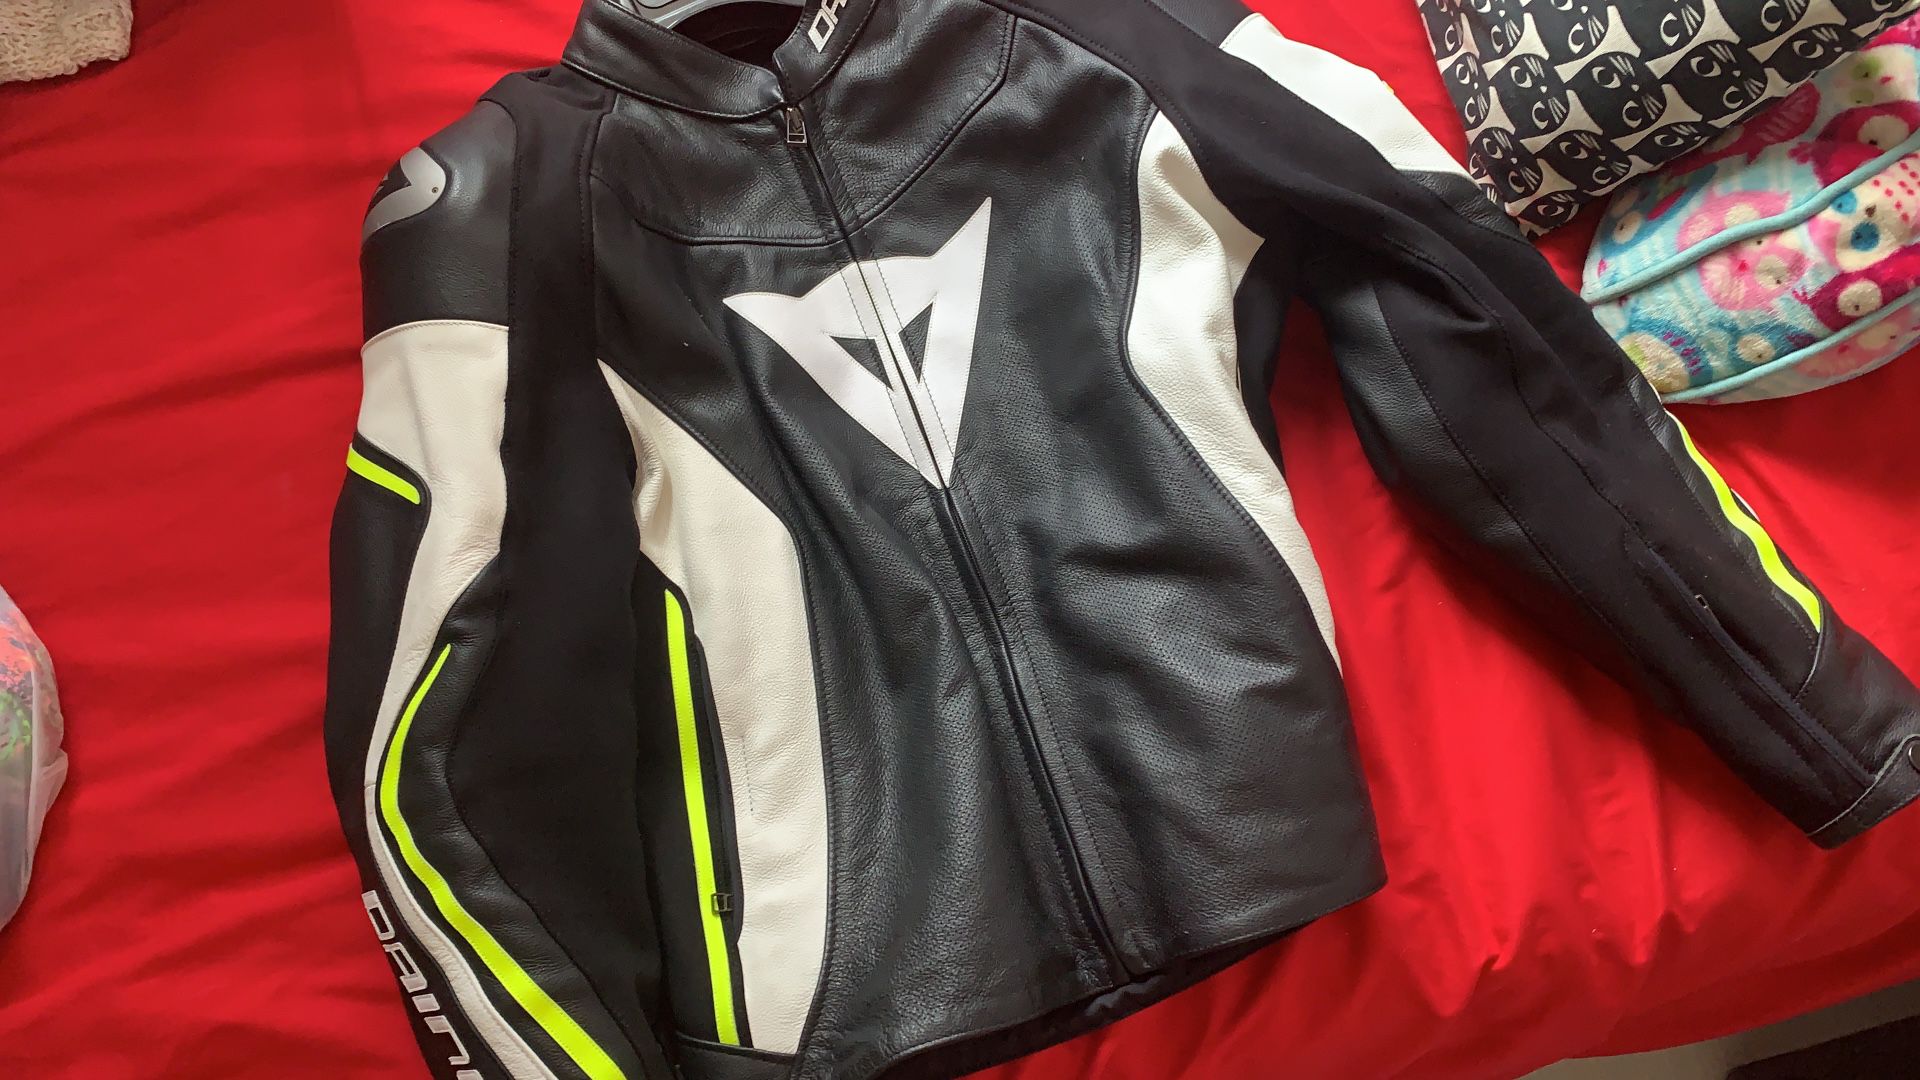 Dainese motorcycle jacket for men